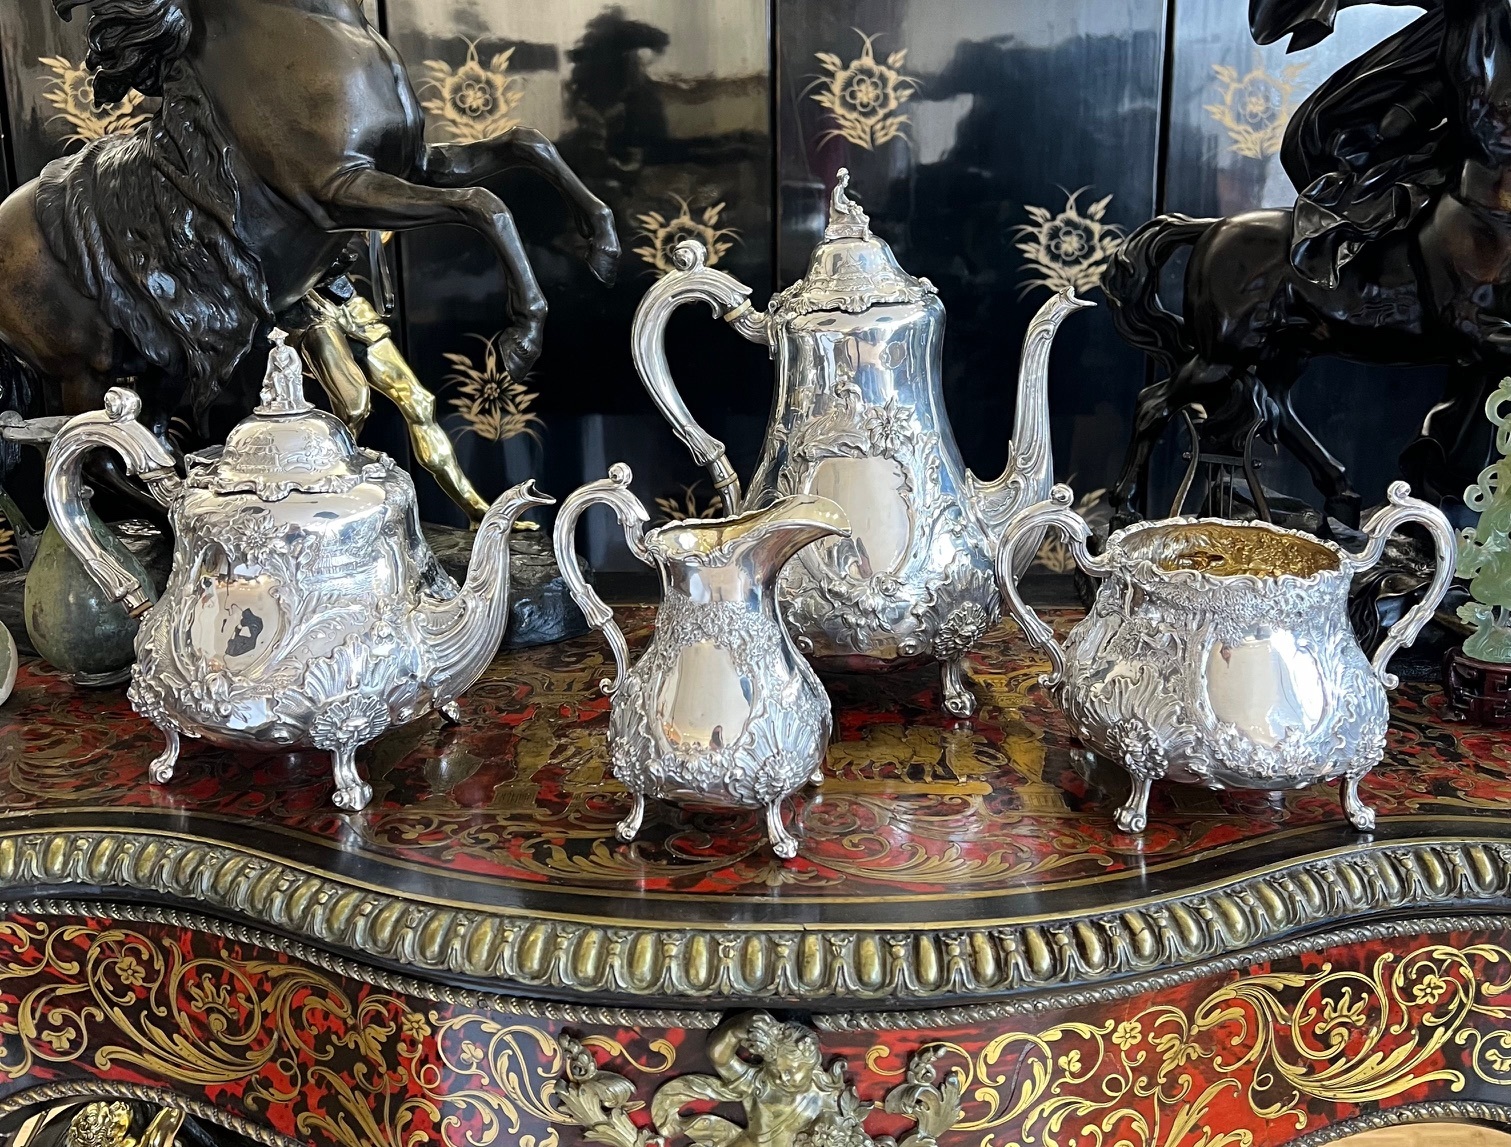 A RARE 19TH CENTURY SILVER TEA AND COFFEE SET WITH SCENES OF TEA AND COFFEE PRODUCTION - Image 2 of 17